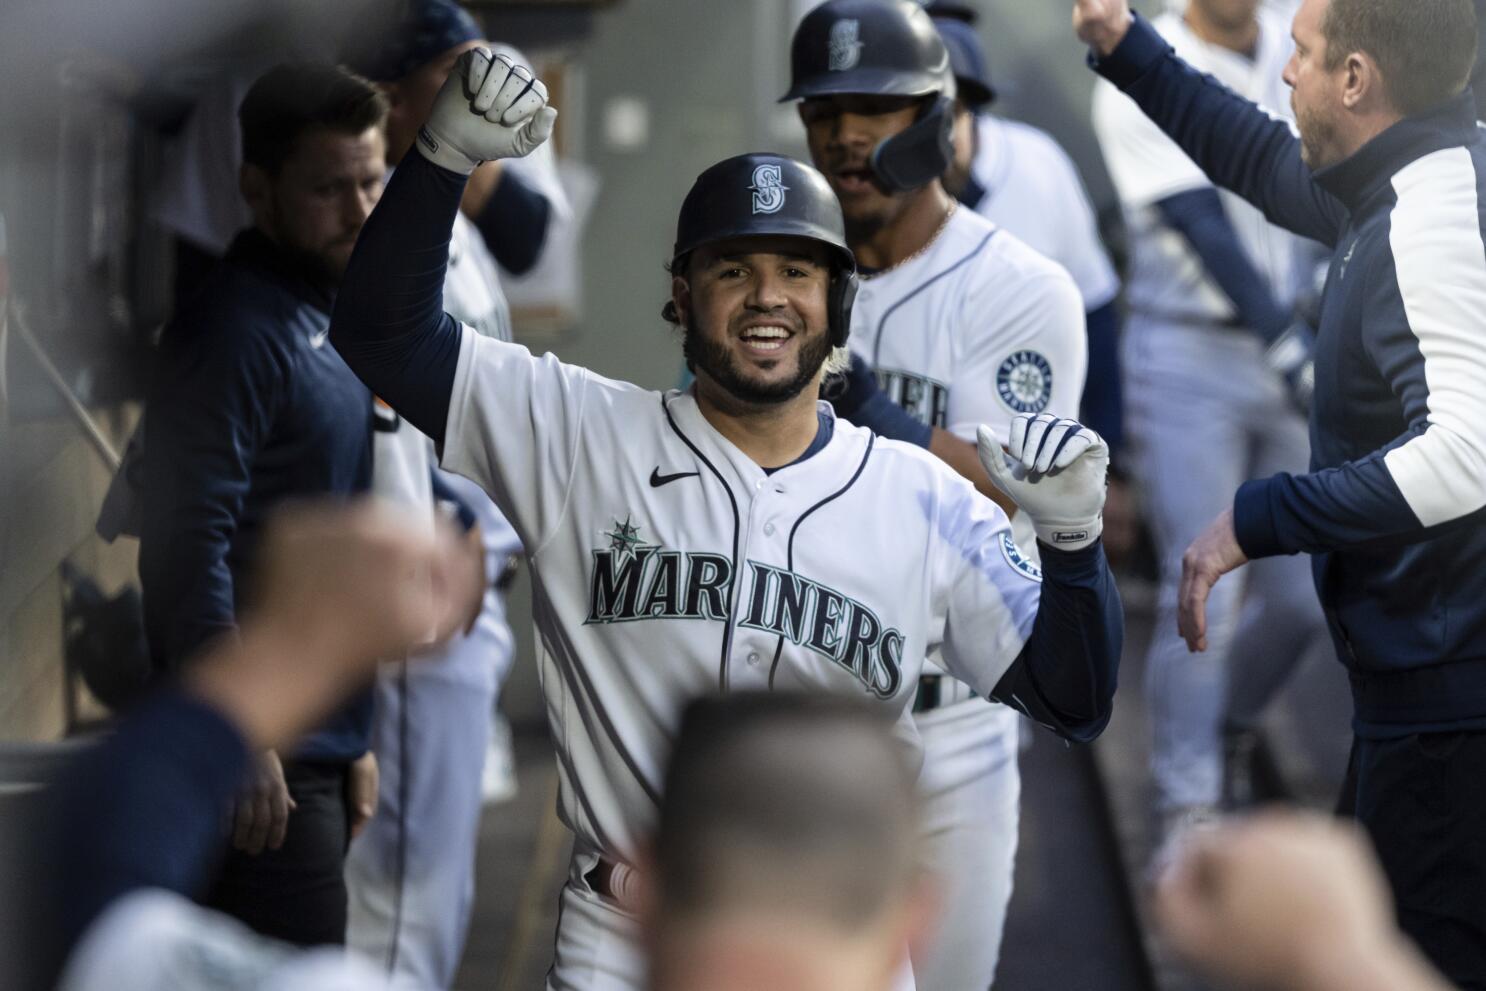 What happened to TY France? Mariners season under threat after